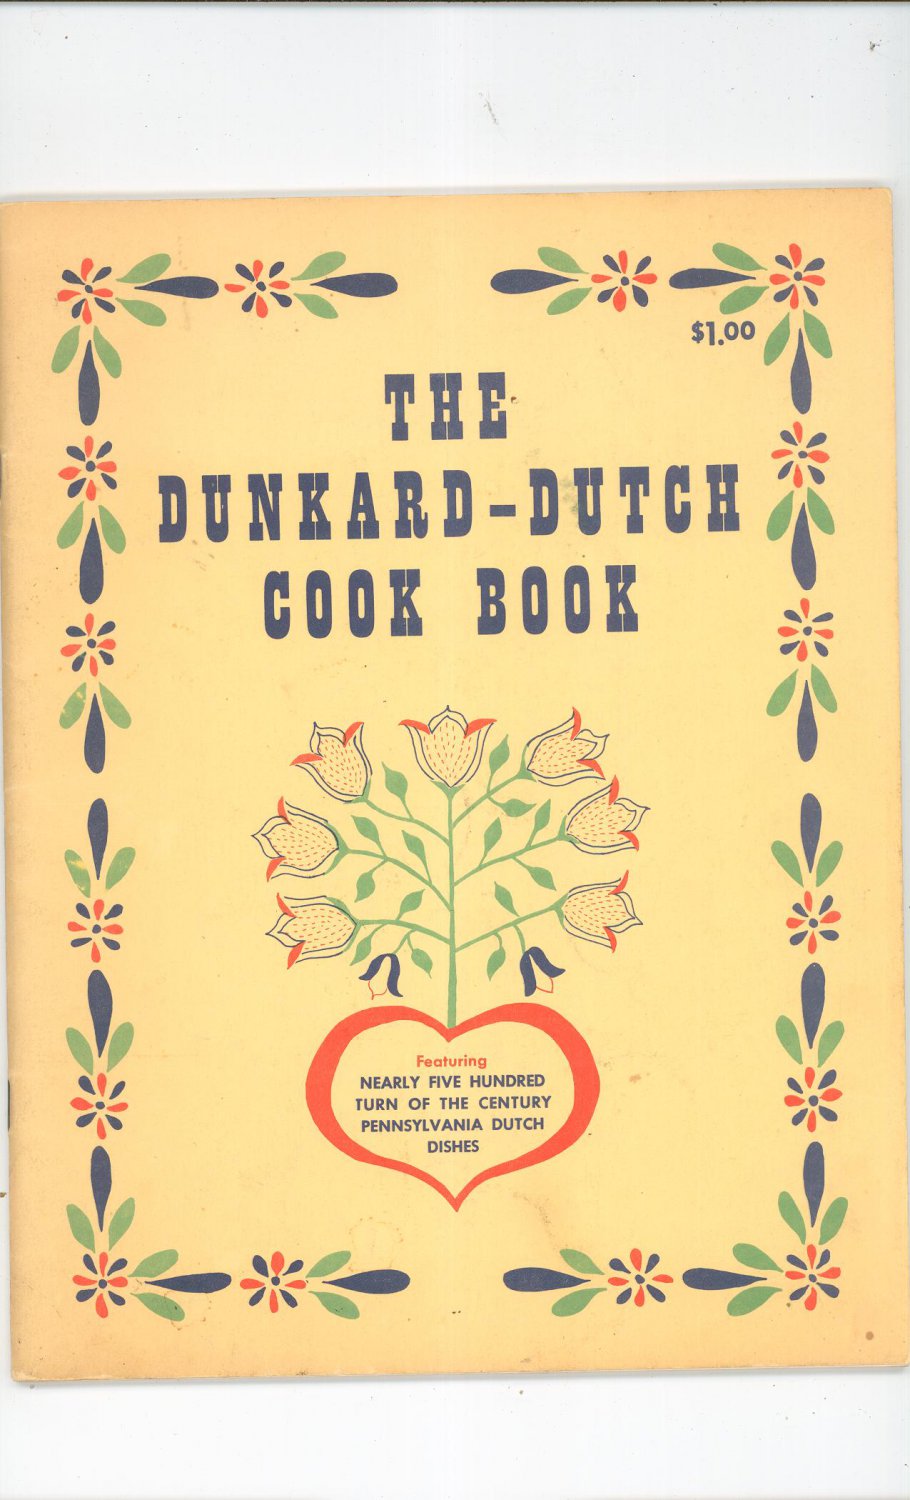 The Dunkard Dutch Cookbook Vintage 1968 Appiled Arts Nearly 500 Recipes